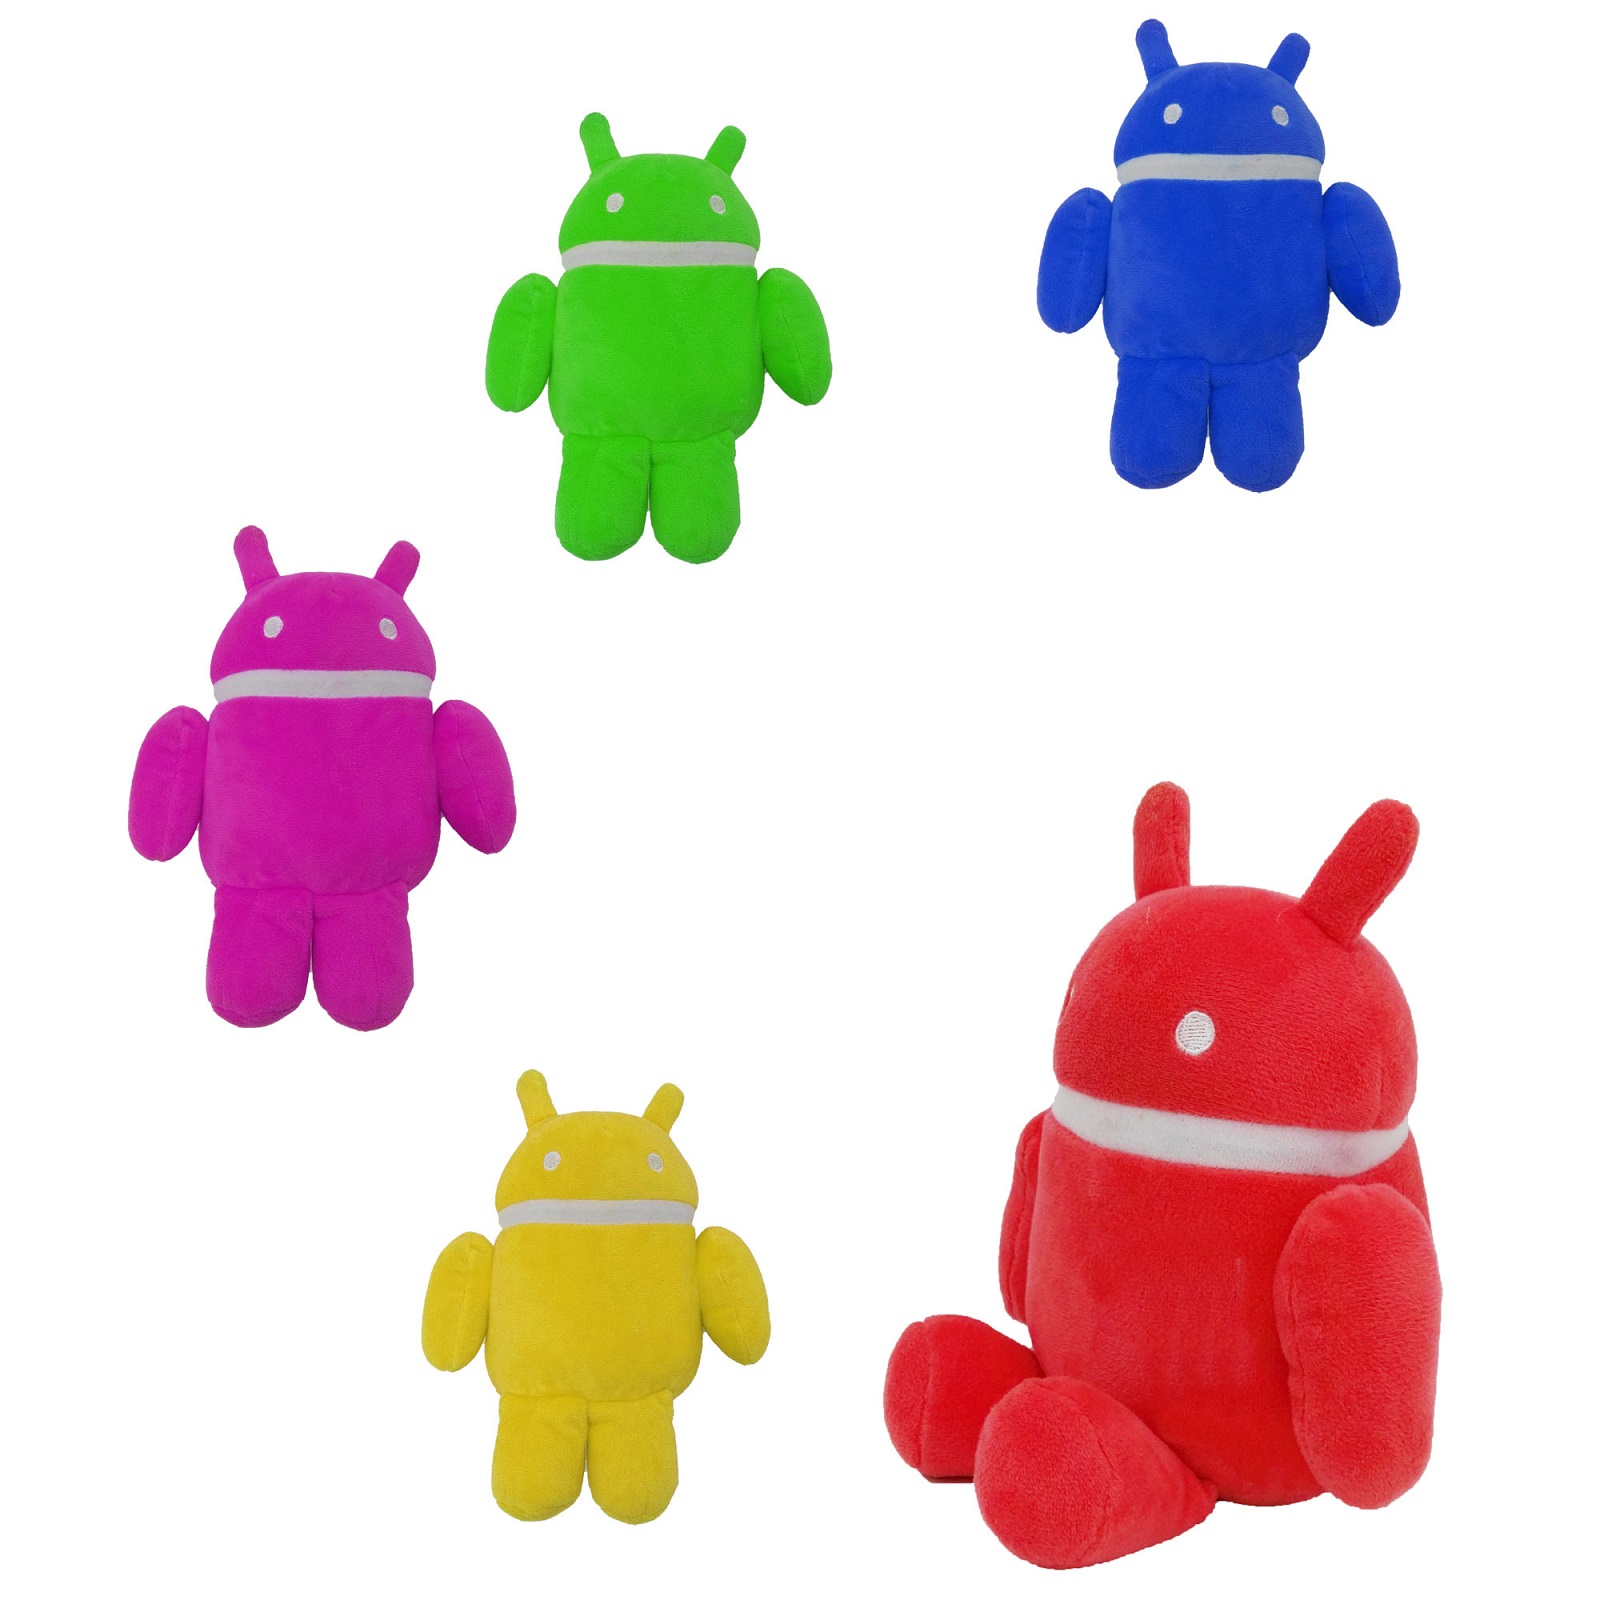 GL-AAA1009 8in Tall Colors Android Robot Plush Toy Stuffed Doll